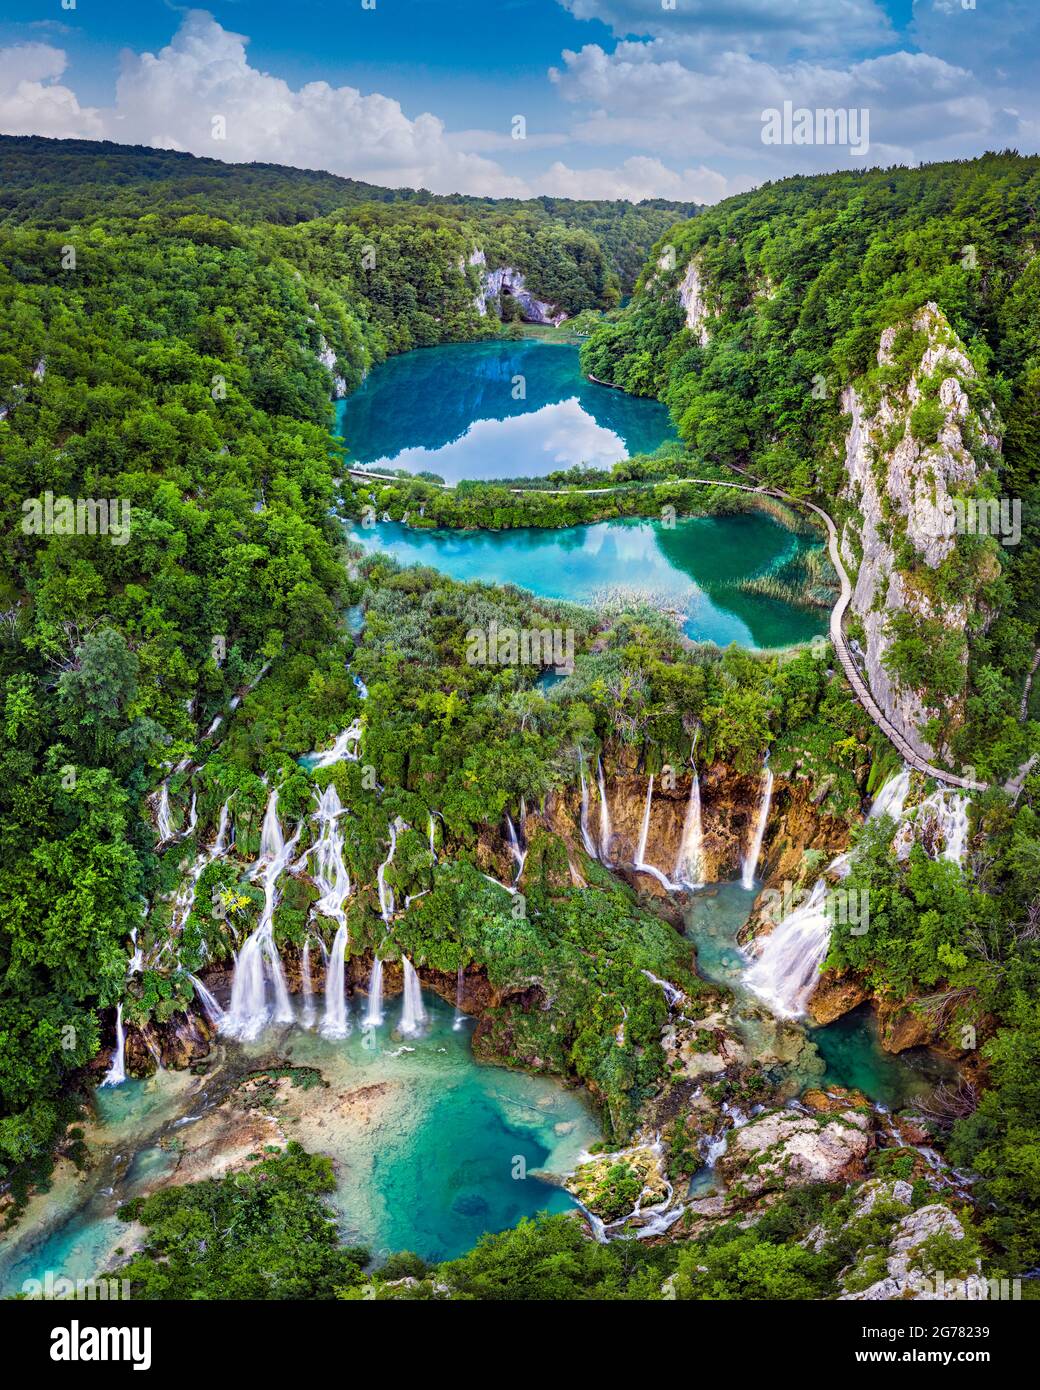 Plitvice, Croatia - Amazing view of the beautiful waterfalls of Plitvice Lakes in Plitvice National Park on a bright summer day with blue sky and clou Stock Photo